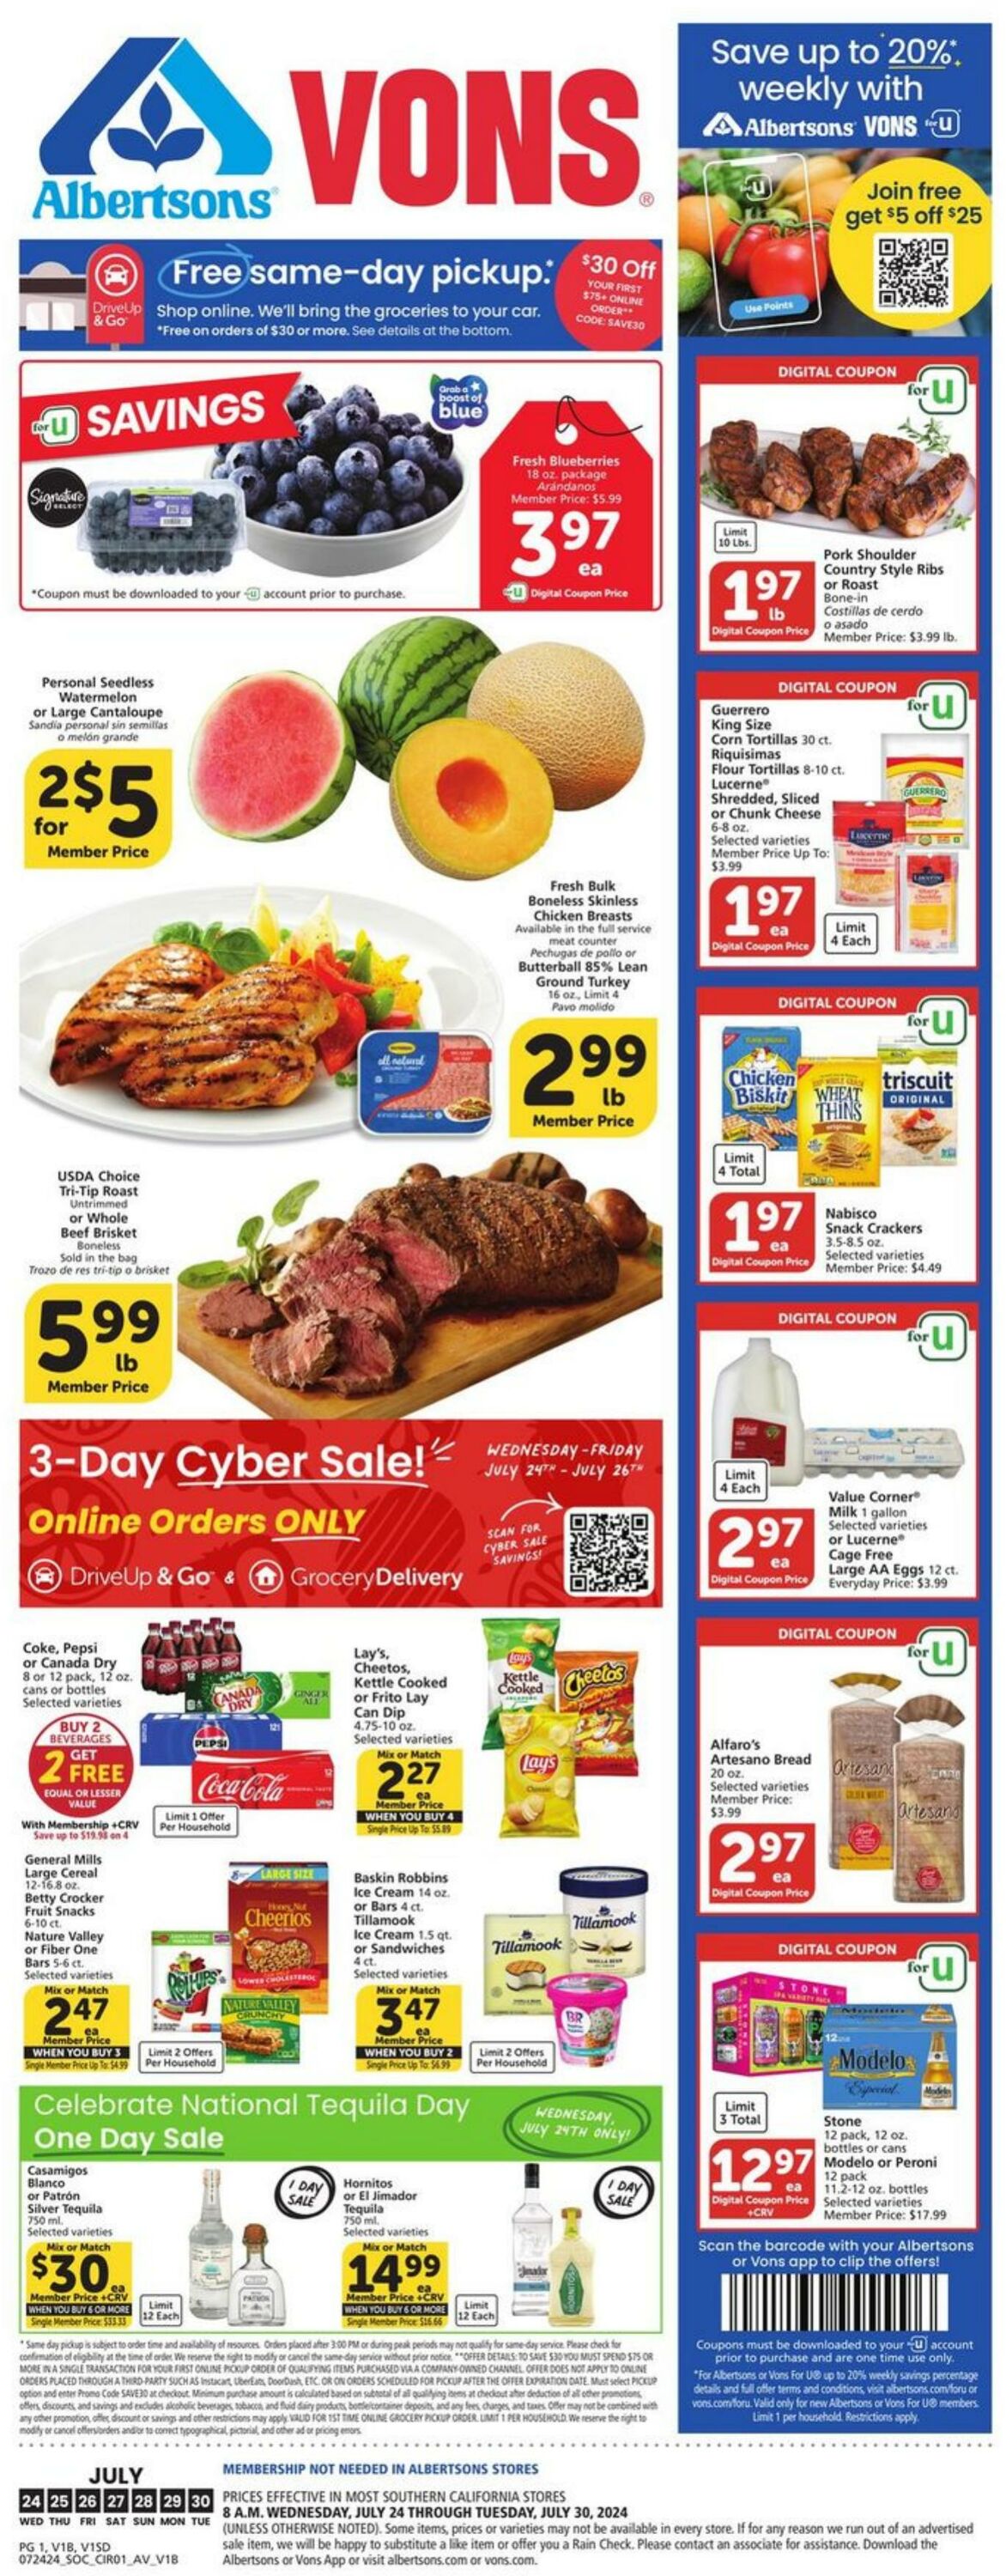 Vons Promotional weekly ads